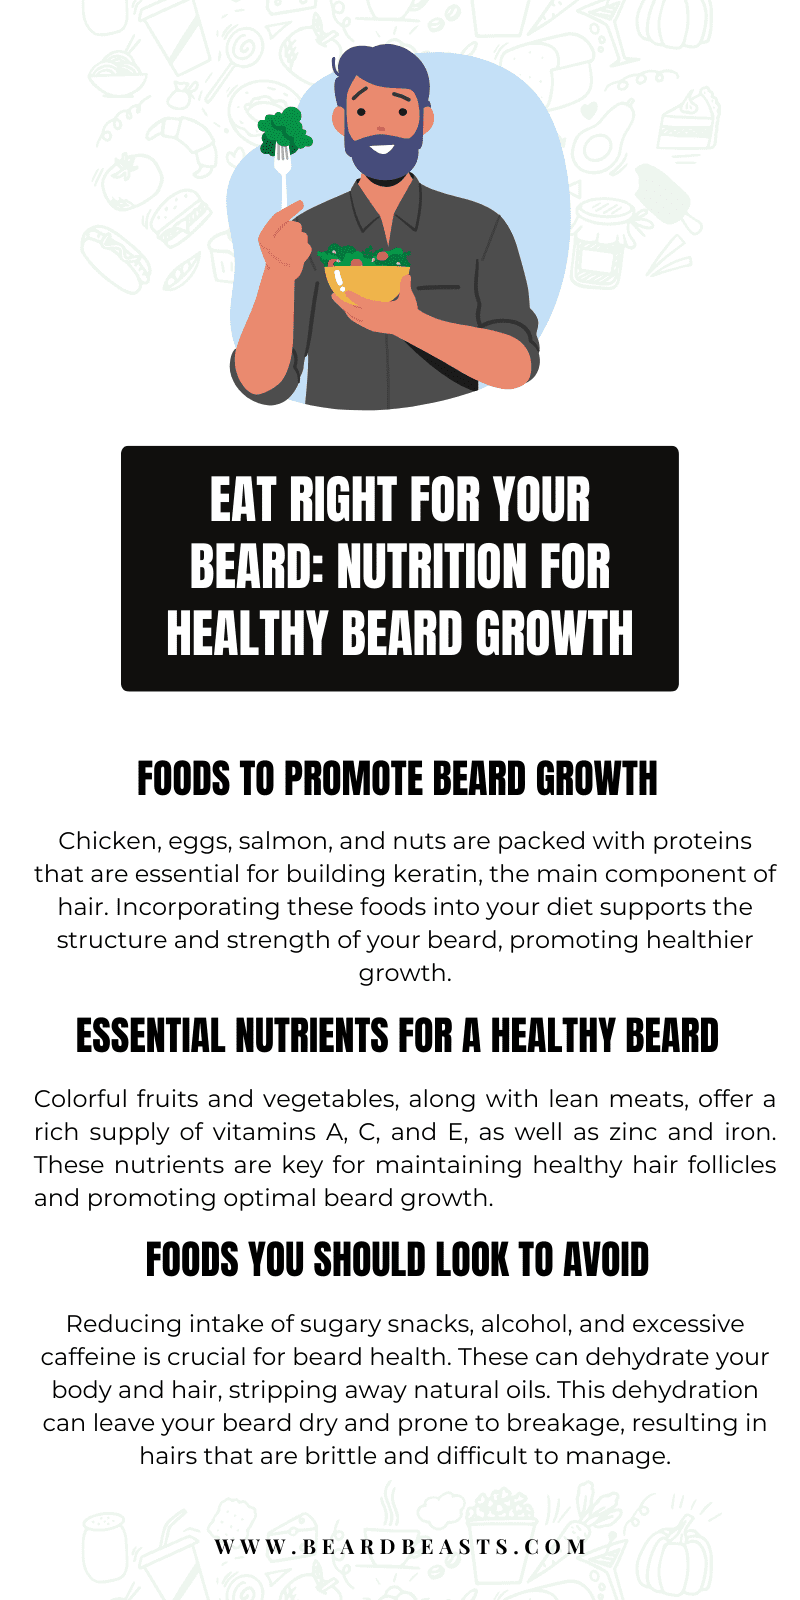 A colorful infographic titled "Eat Right for Your Beard: Nutrition for Healthy Beard Growth". The infographic features an illustration of a smiling man with a beard holding a bowl of salad. The infographic is divided into three sections: "Foods to Promote Beard Growth", which lists chicken, eggs, salmon, and nuts as protein-rich foods essential for keratin production and healthy beard growth; "Essential Nutrients for a Healthy Beard", highlighting the importance of colorful fruits and vegetables, lean meats, vitamins A, C, E, zinc and iron for maintaining healthy hair follicles; and "Foods You Should Look to Avoid", advising reducing sugary snacks, alcohol, and excessive caffeine, as they can dehydrate the body and hair, leading to brittle hairs prone to breakage. The infographic is attributed to www.beardbeasts.com.